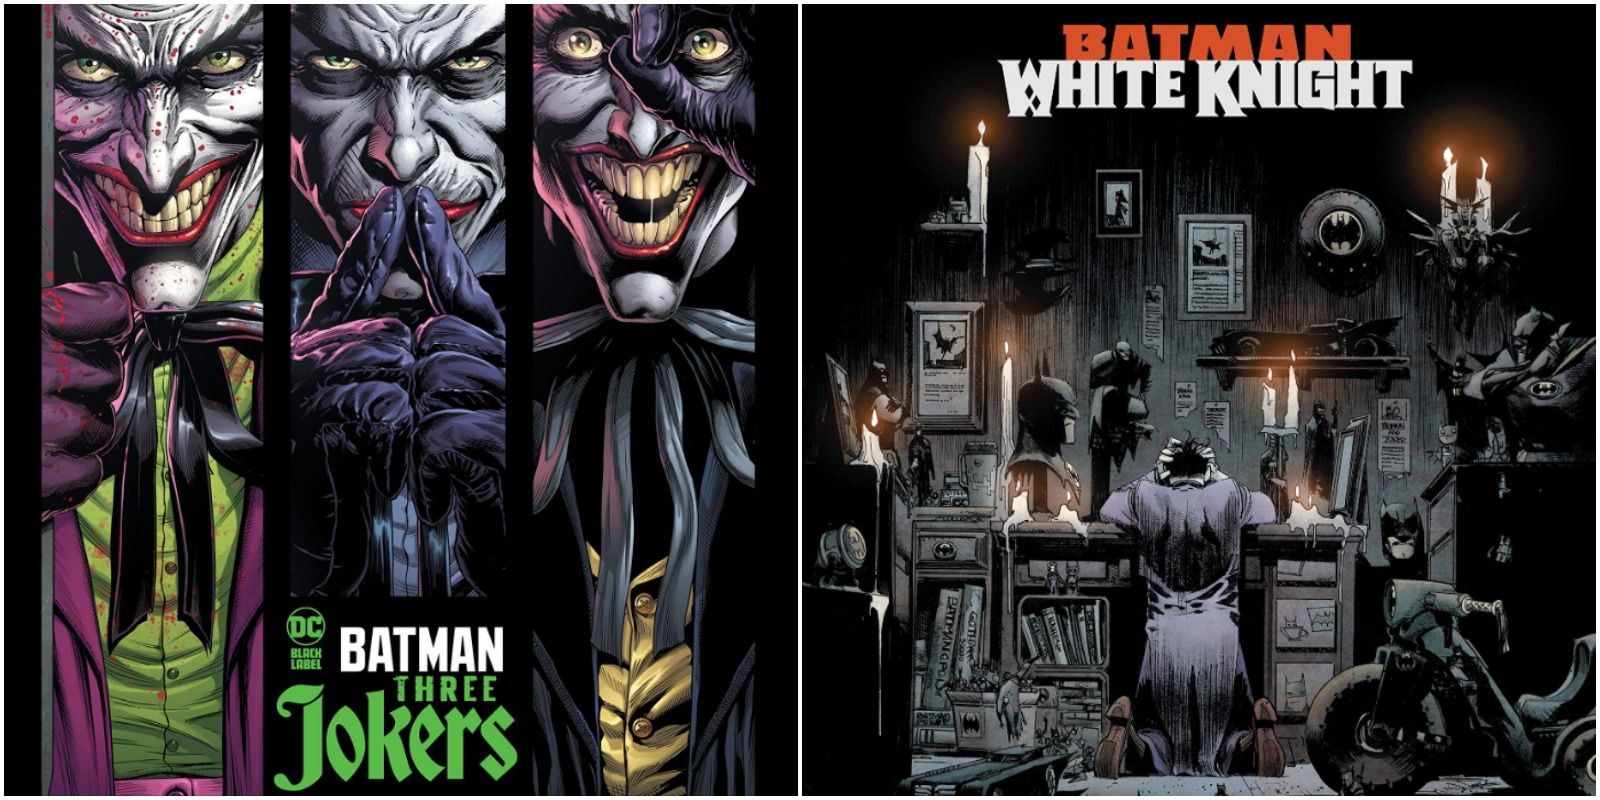 Cover art for Geoff Johns and Jason Fabok's Three Jokers, and cover art for Sean Murphy's White Knight